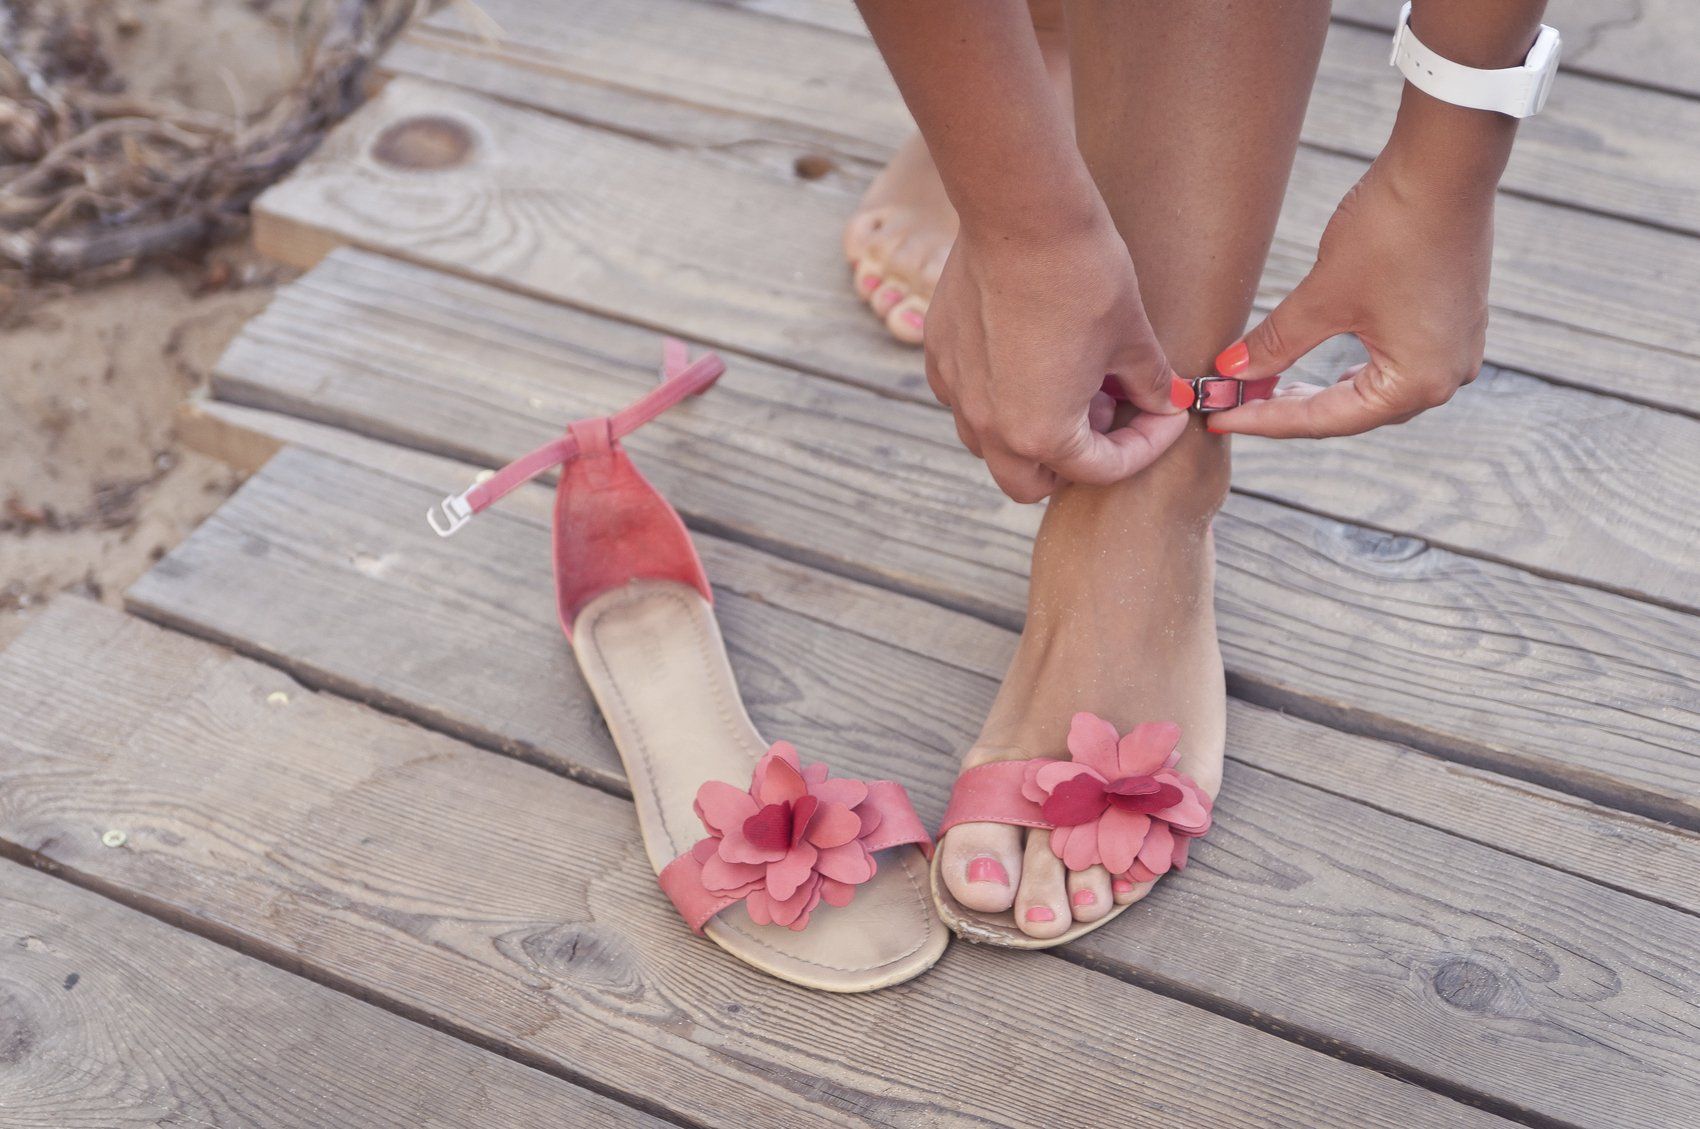 Donddi Sandals Outfits for Summer – the Best Place to Get Them